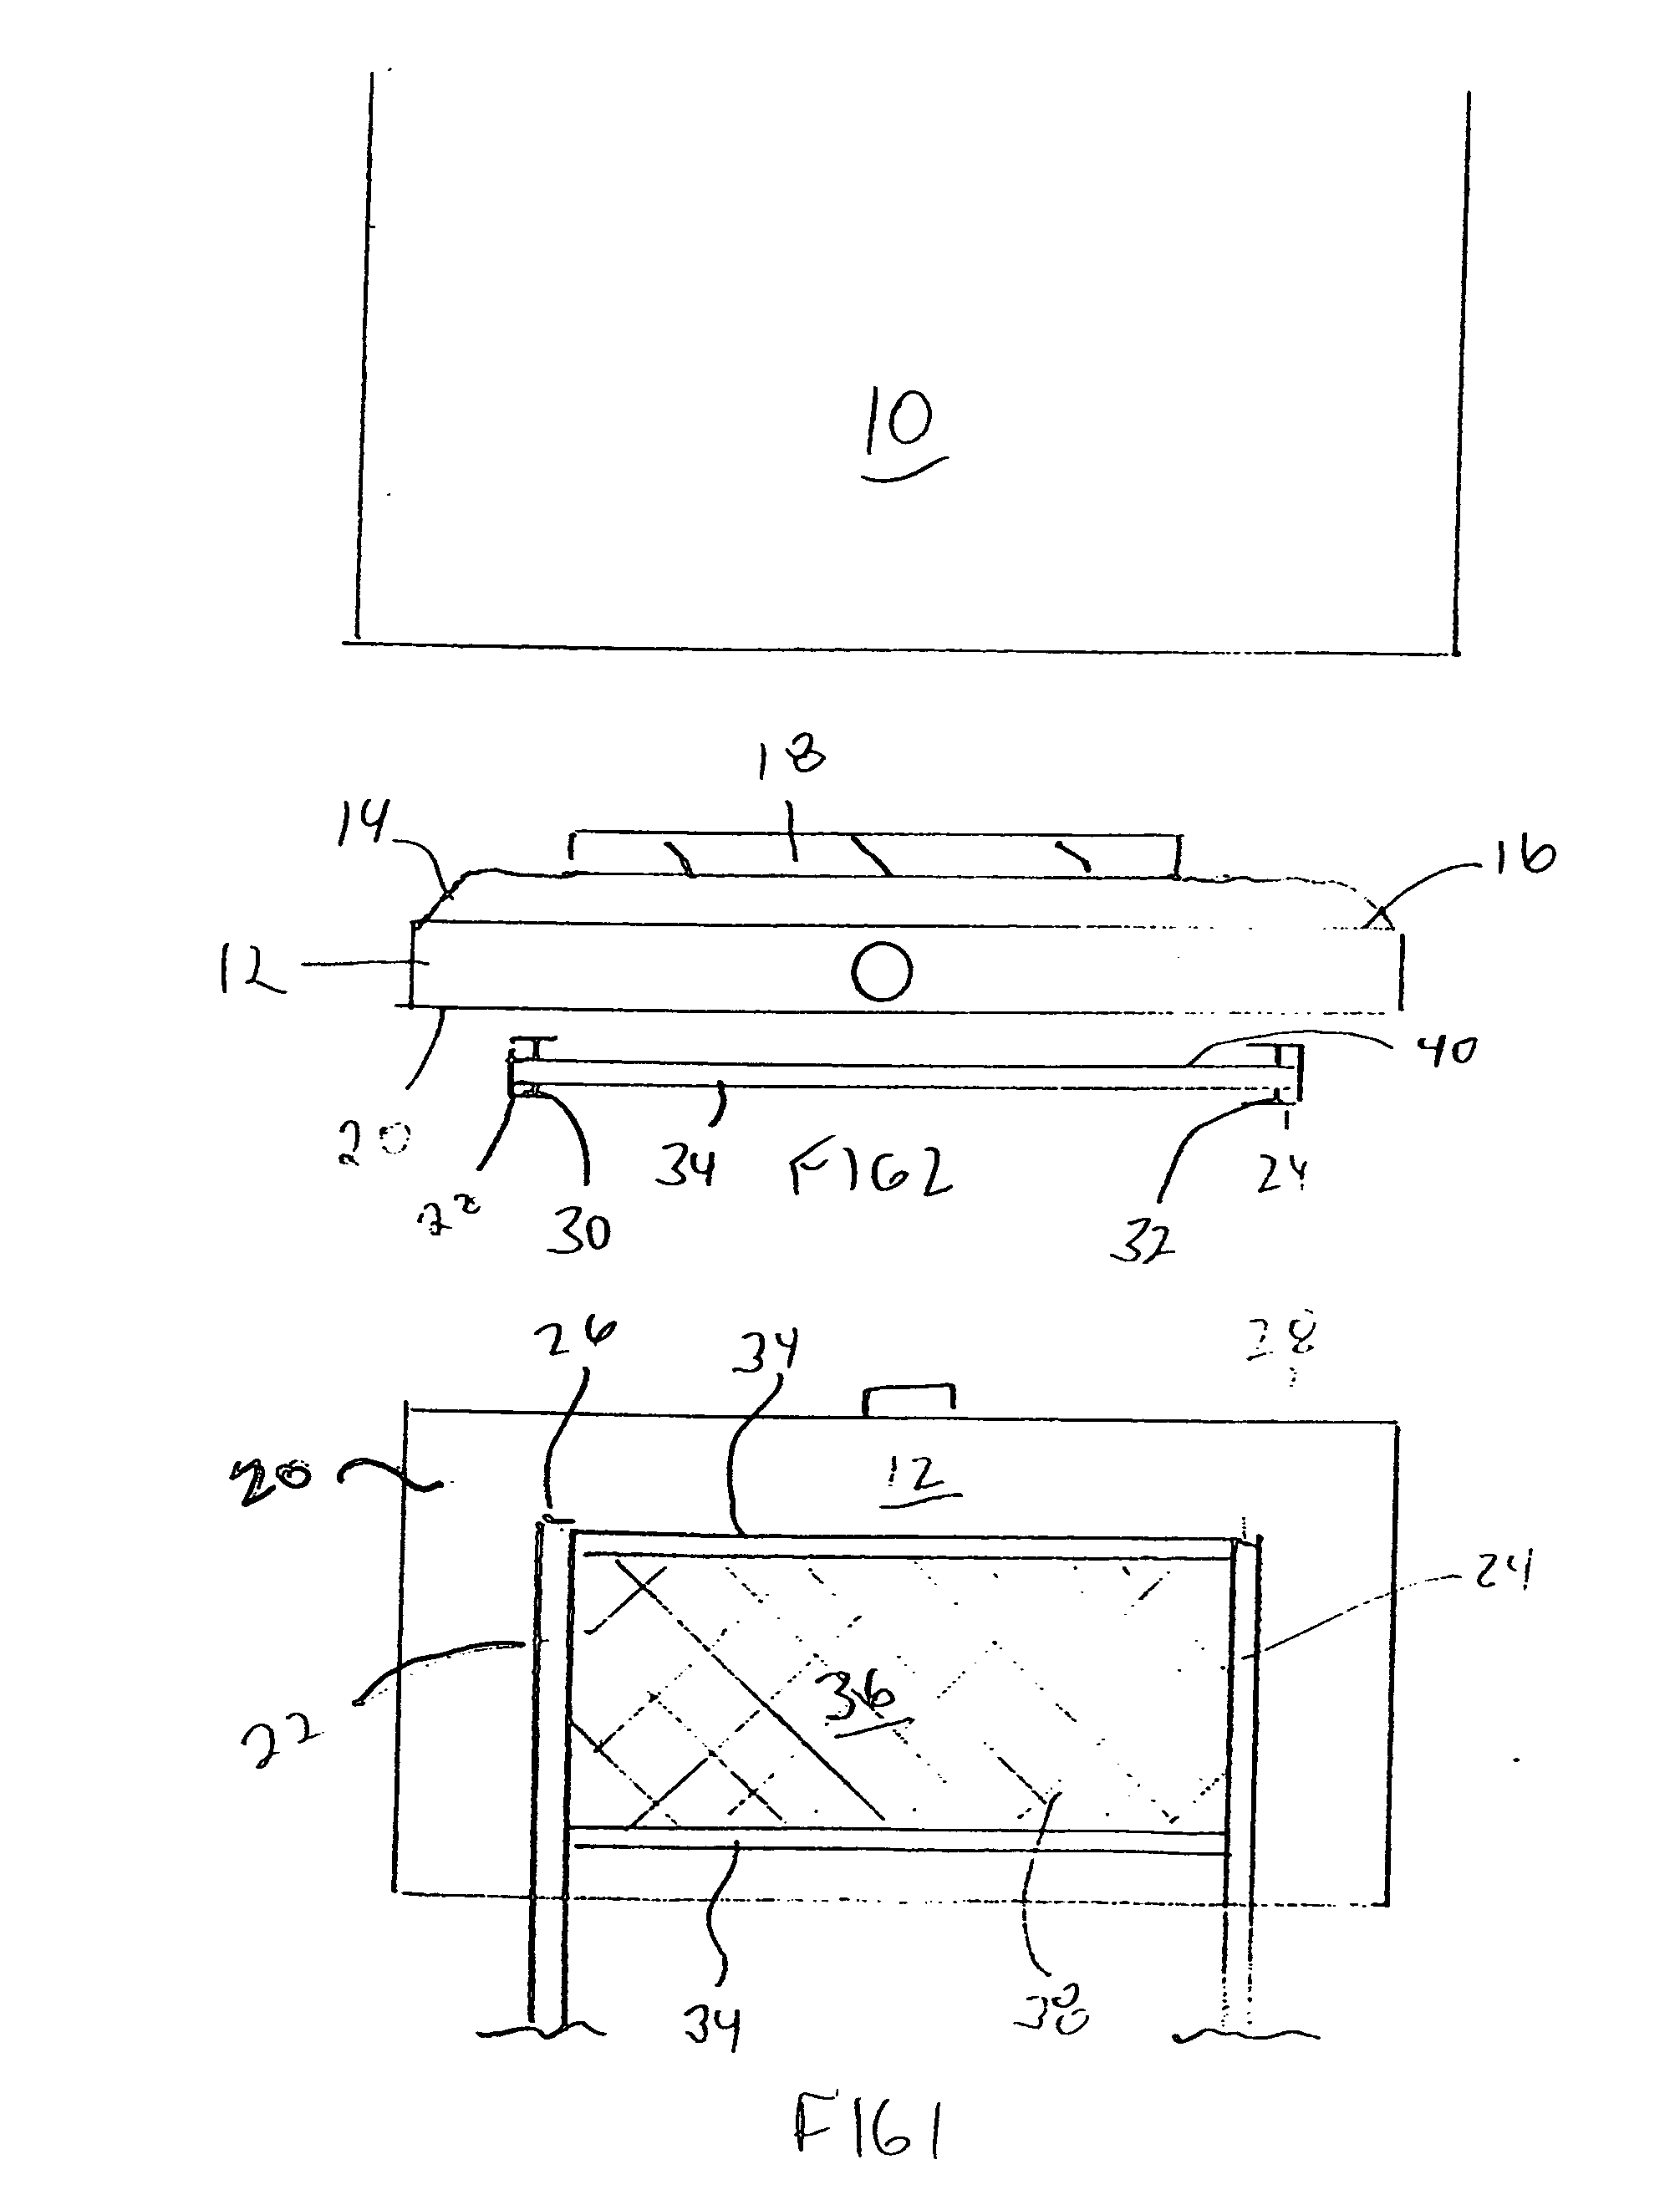 Vehicle mounted filter assembly for entrapment of ambient air pollutants